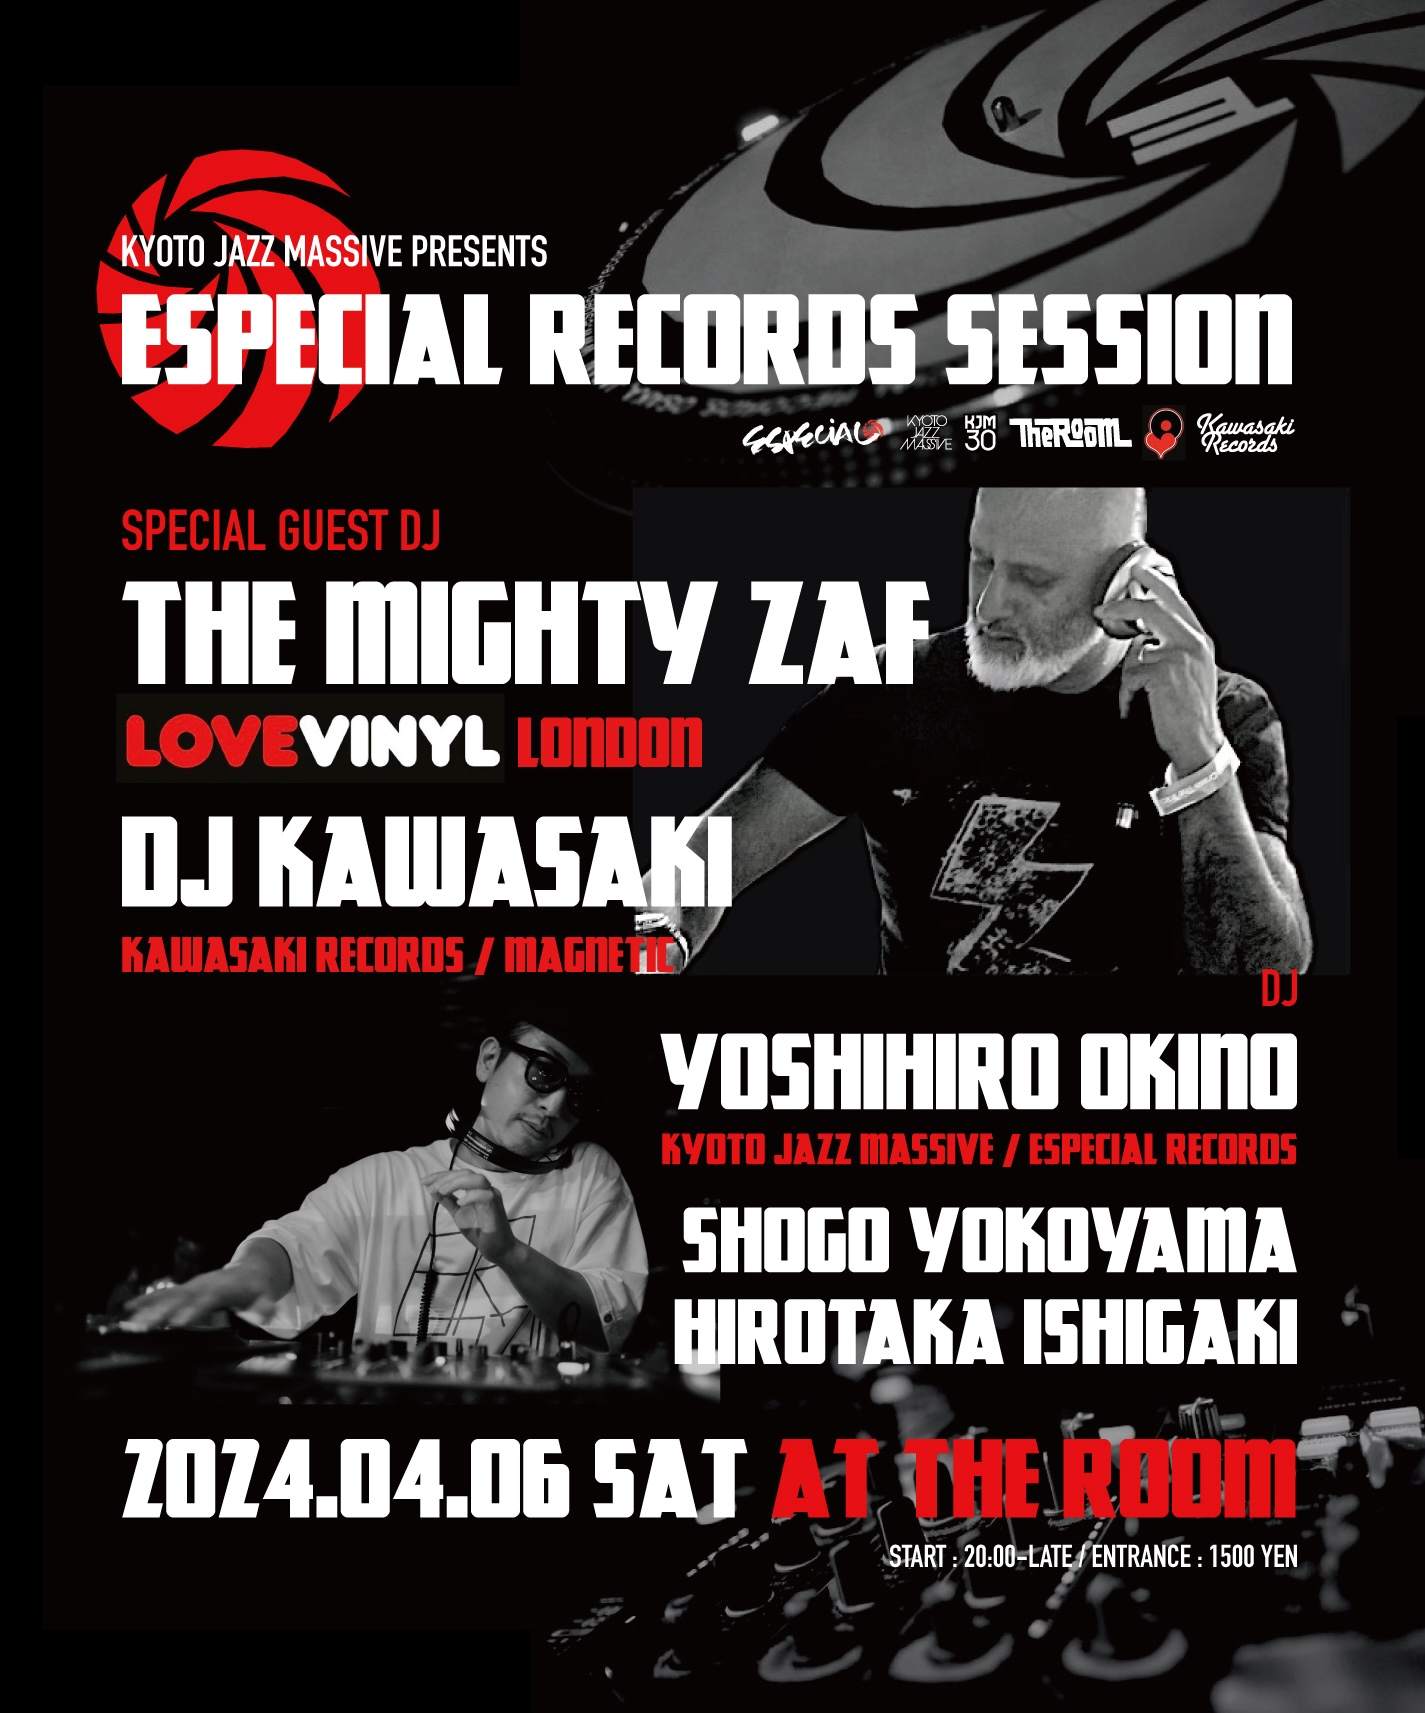 ESPECIAL RECORDS SESSION - フライヤー表